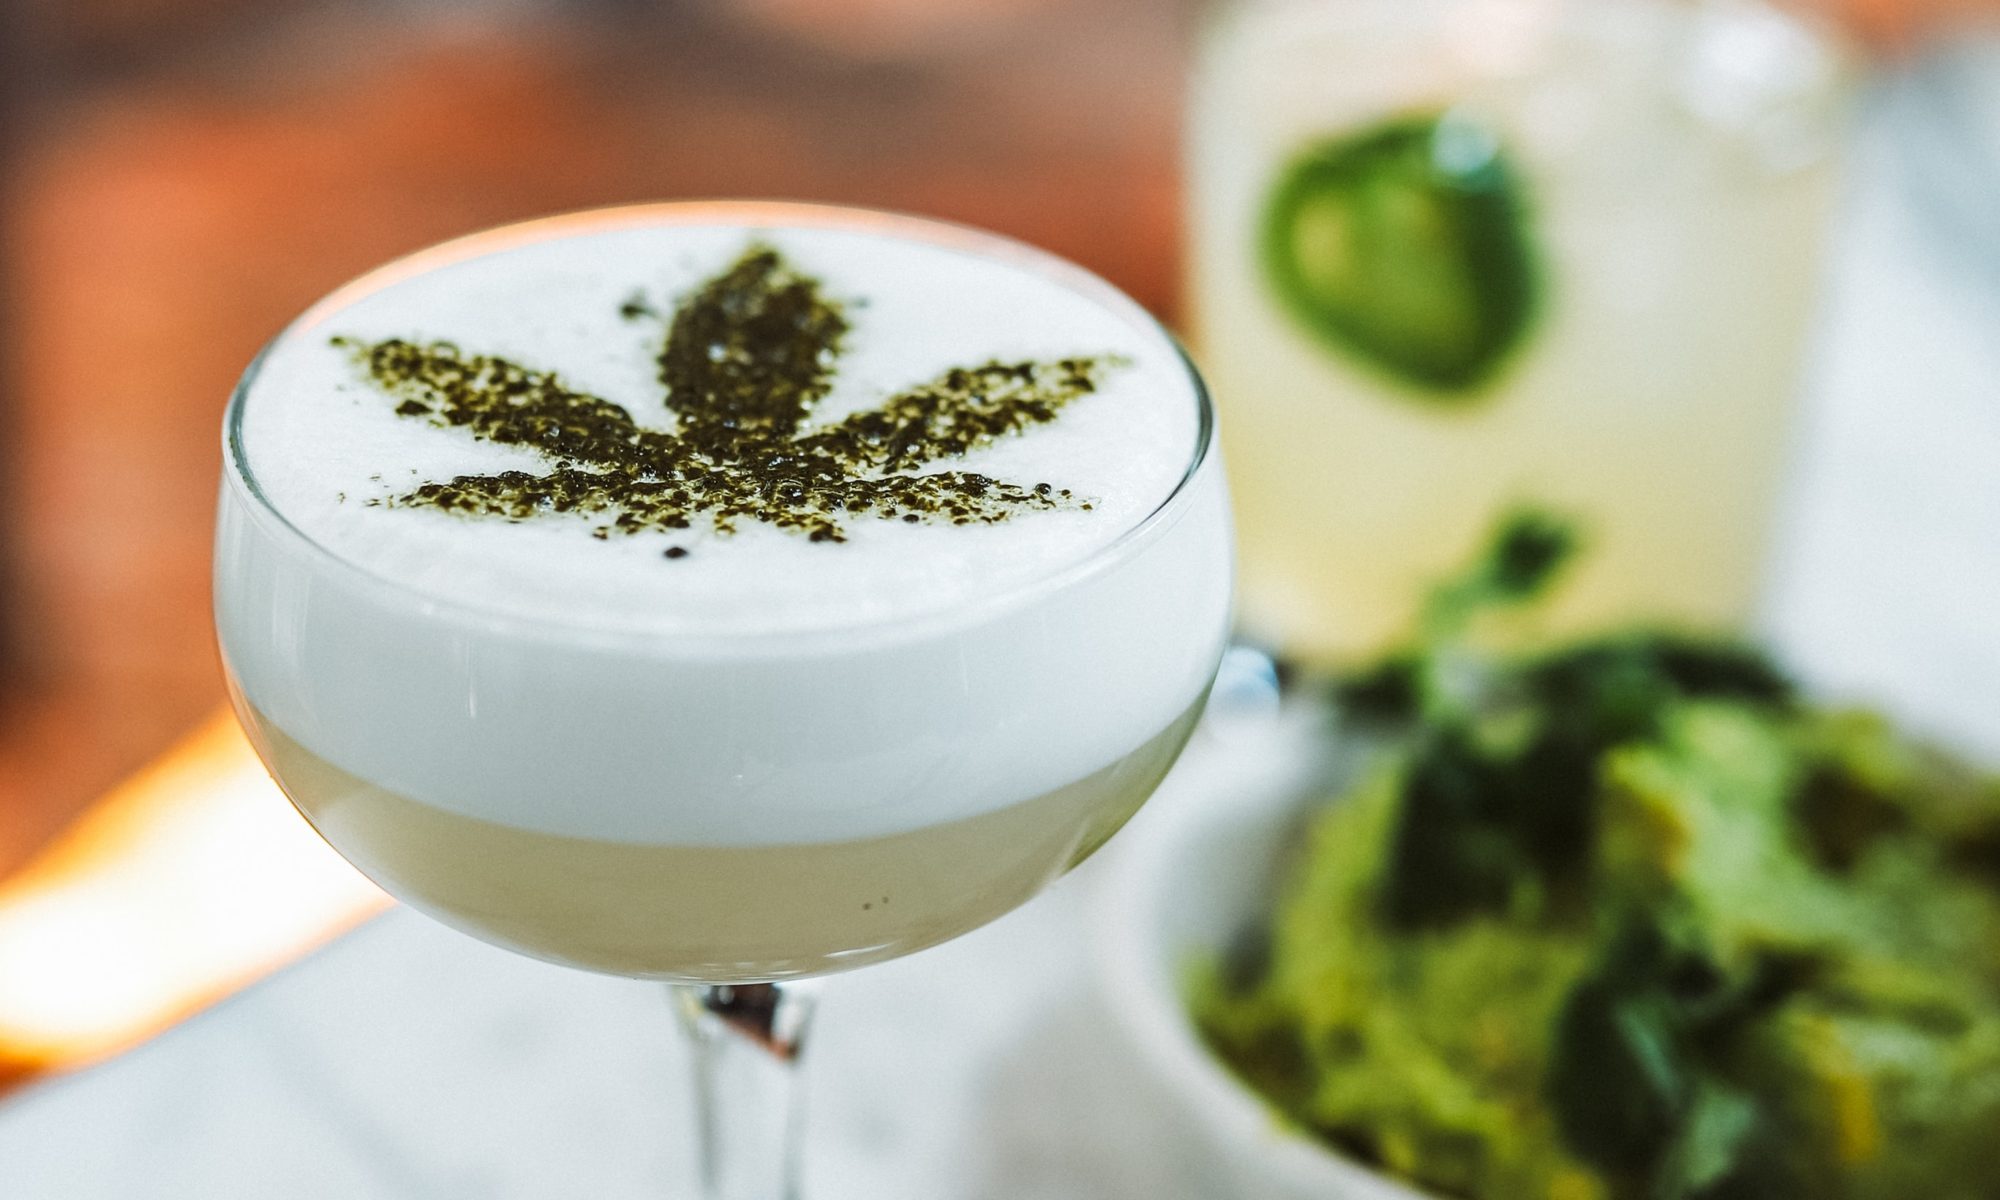 cocktail with cannabis leaf design